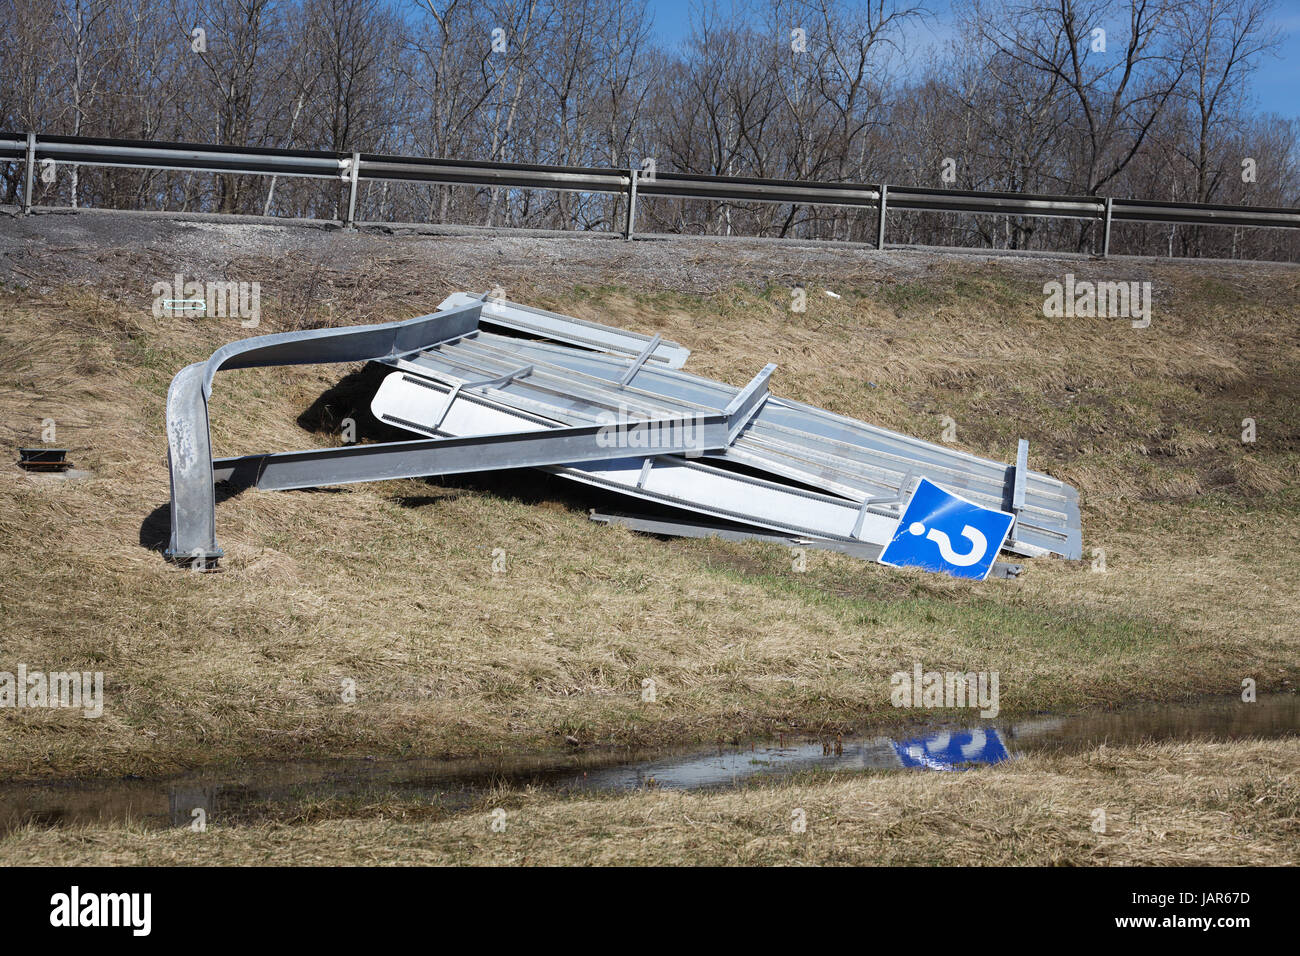 Canajoharie, New York USA - April 9, 2017: A traffic sign along Interstate 90 lays crumpled on the ground after being destroyed by strong winds. Stock Photo